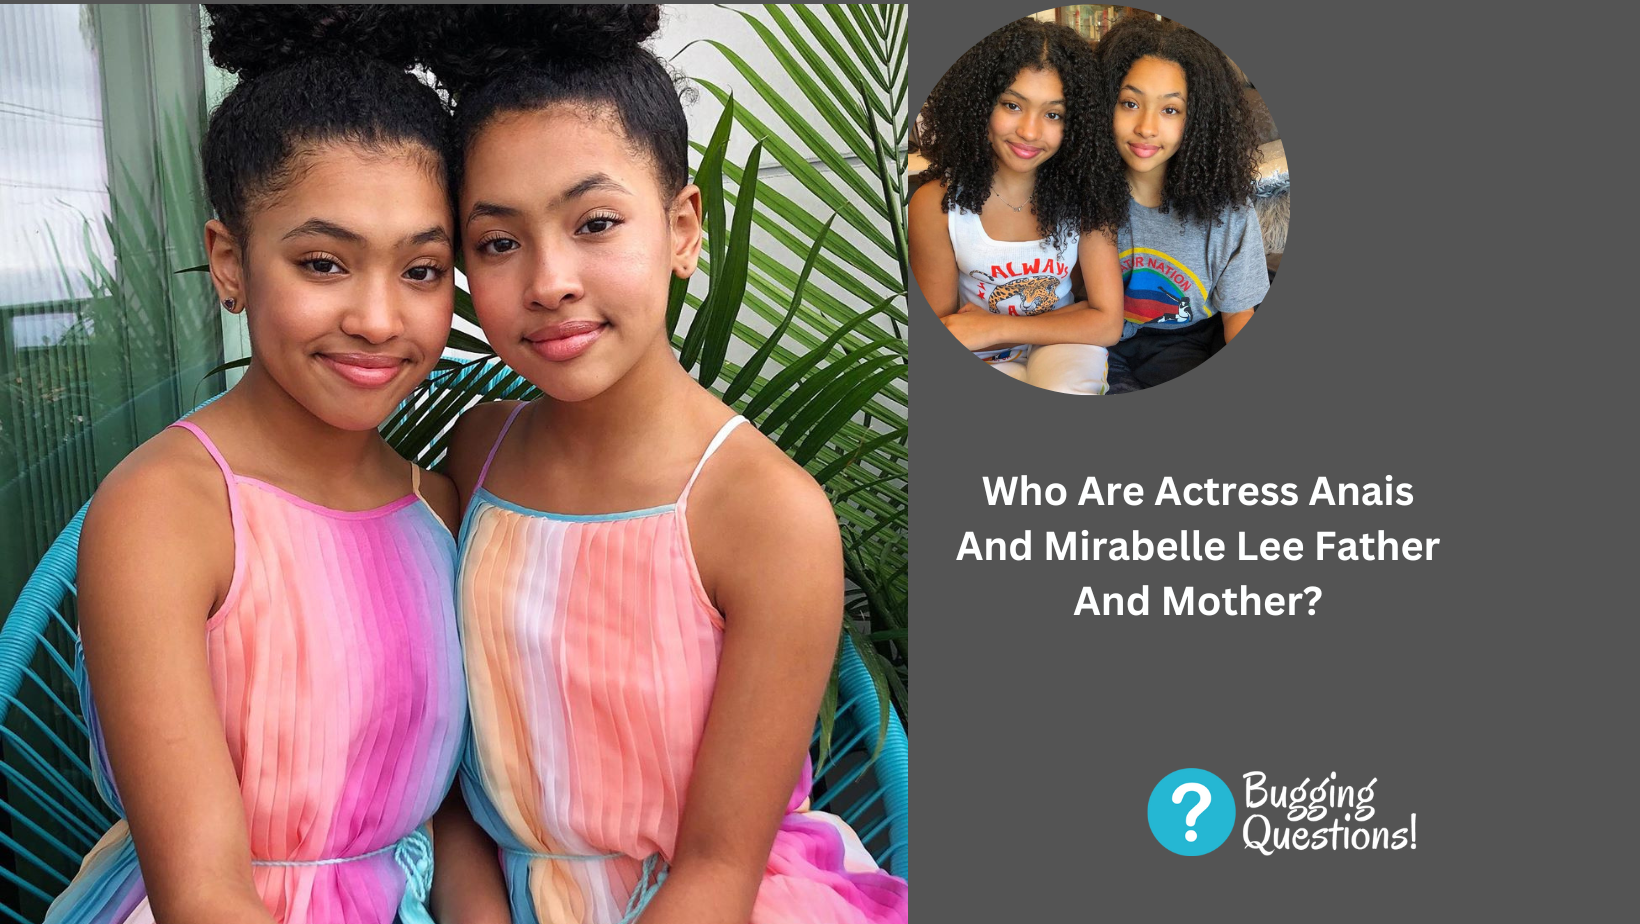 Who Are Actress Anais And Mirabelle Lee Father And Mother?